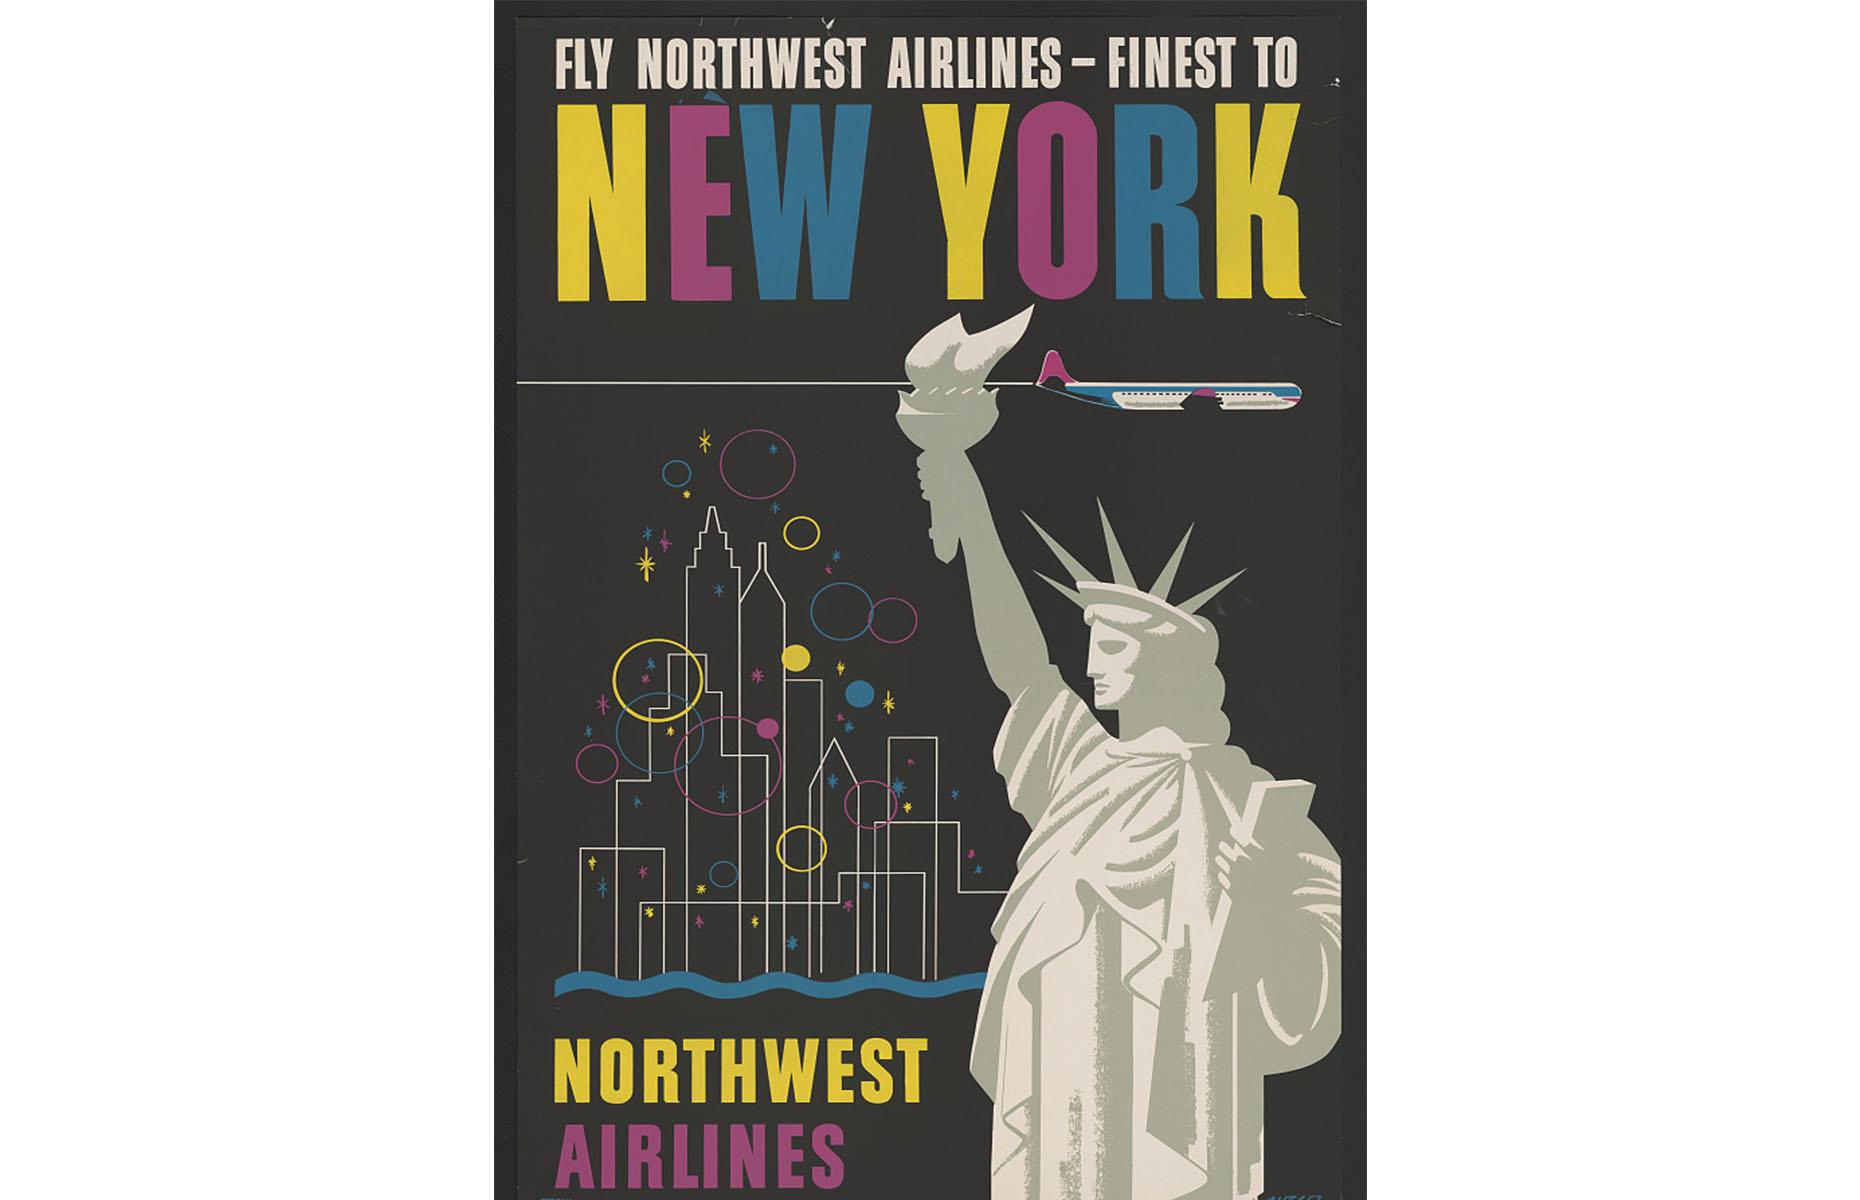 Dating to the 1950s, this airline ad offers a striking depiction of New York City. It's a promotion for Northwest Airlines, an American airline with a near 100-year-old history that was absorbed into Delta in the late Noughties. Here the Big Apple's cityscape is a delicate white silhouette presided over by Lady Liberty.